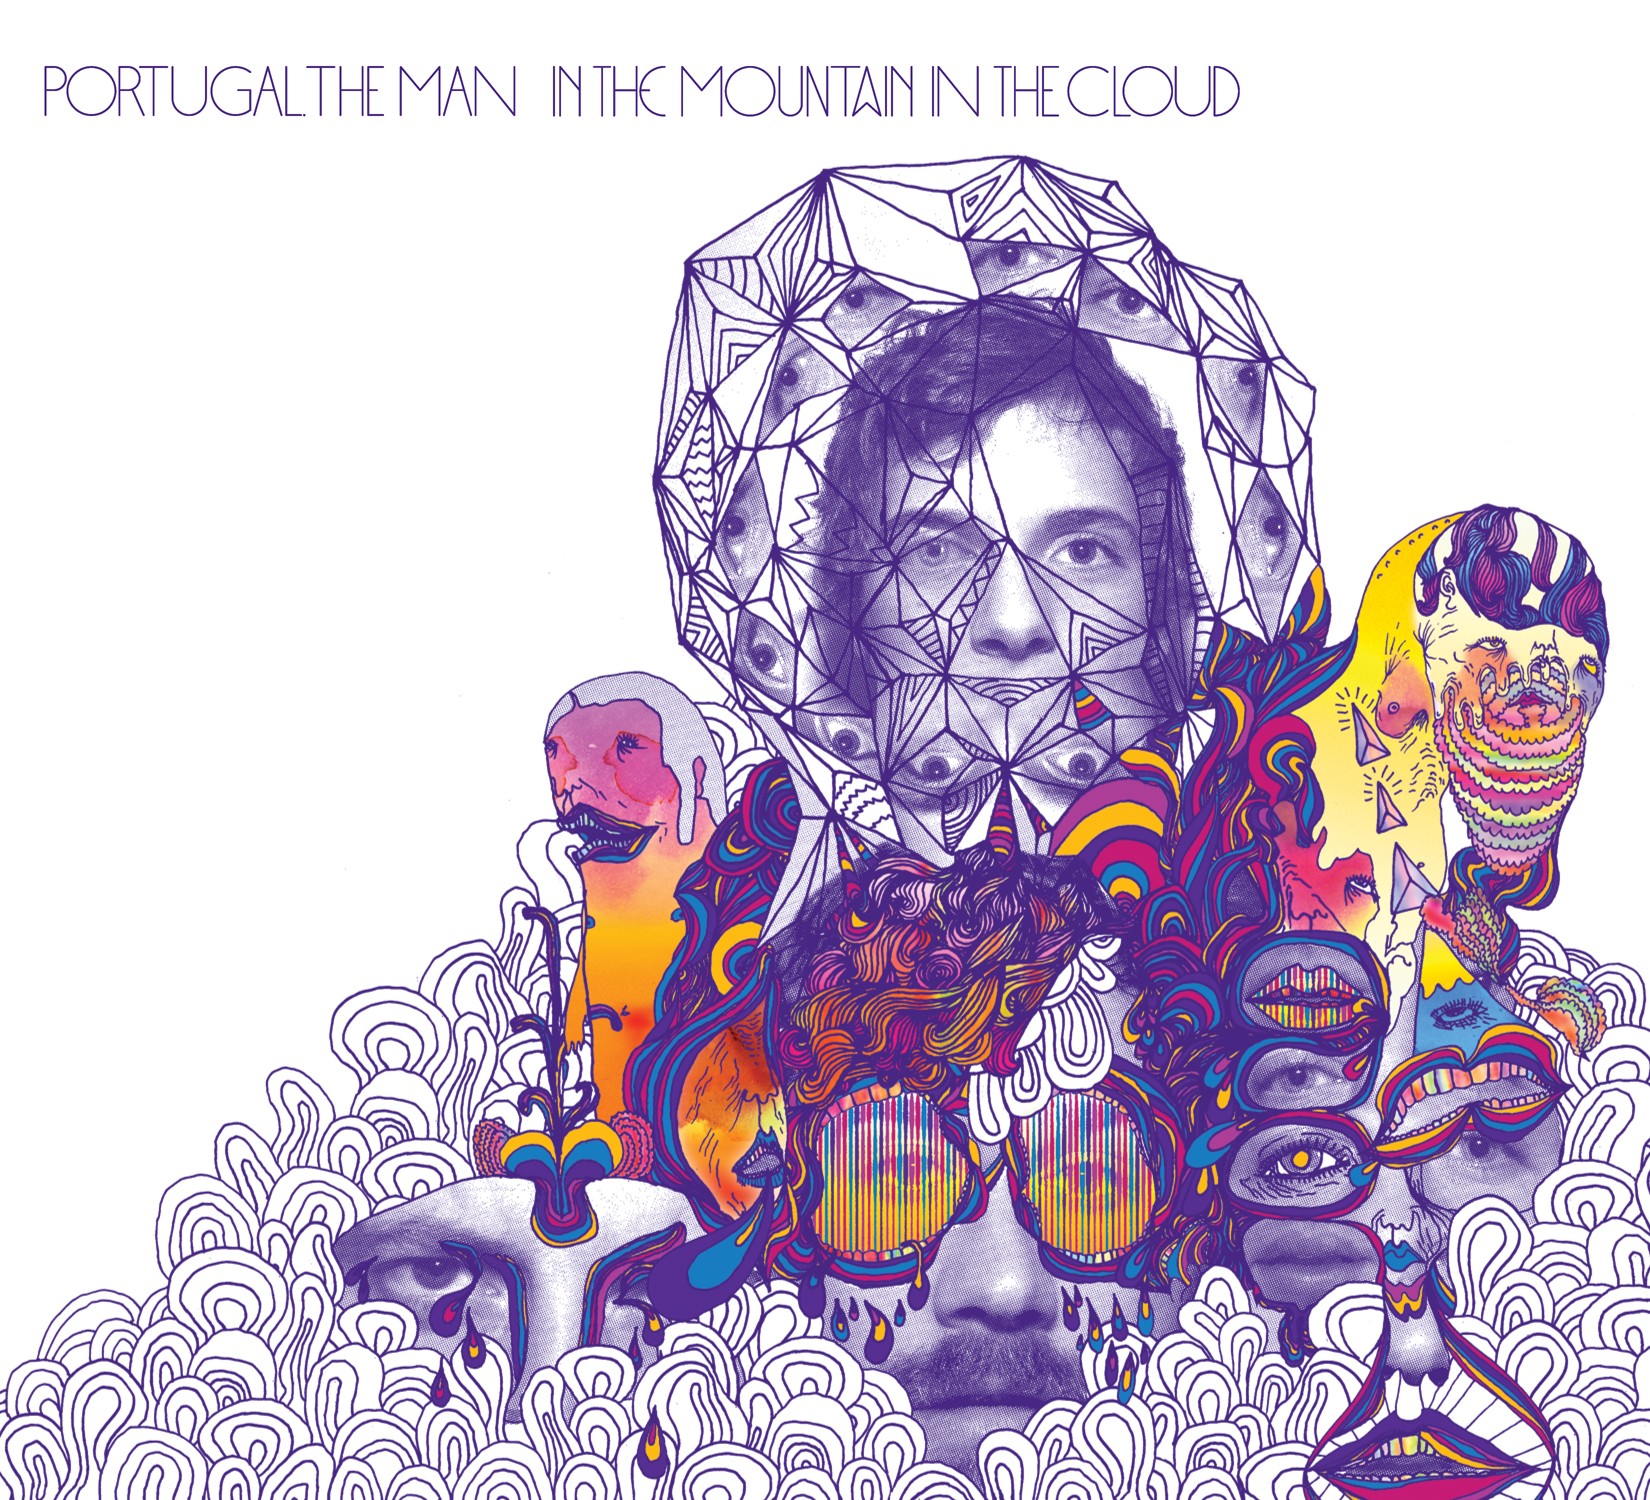 Portugal. The Man - The Mountain In The Cloud LP